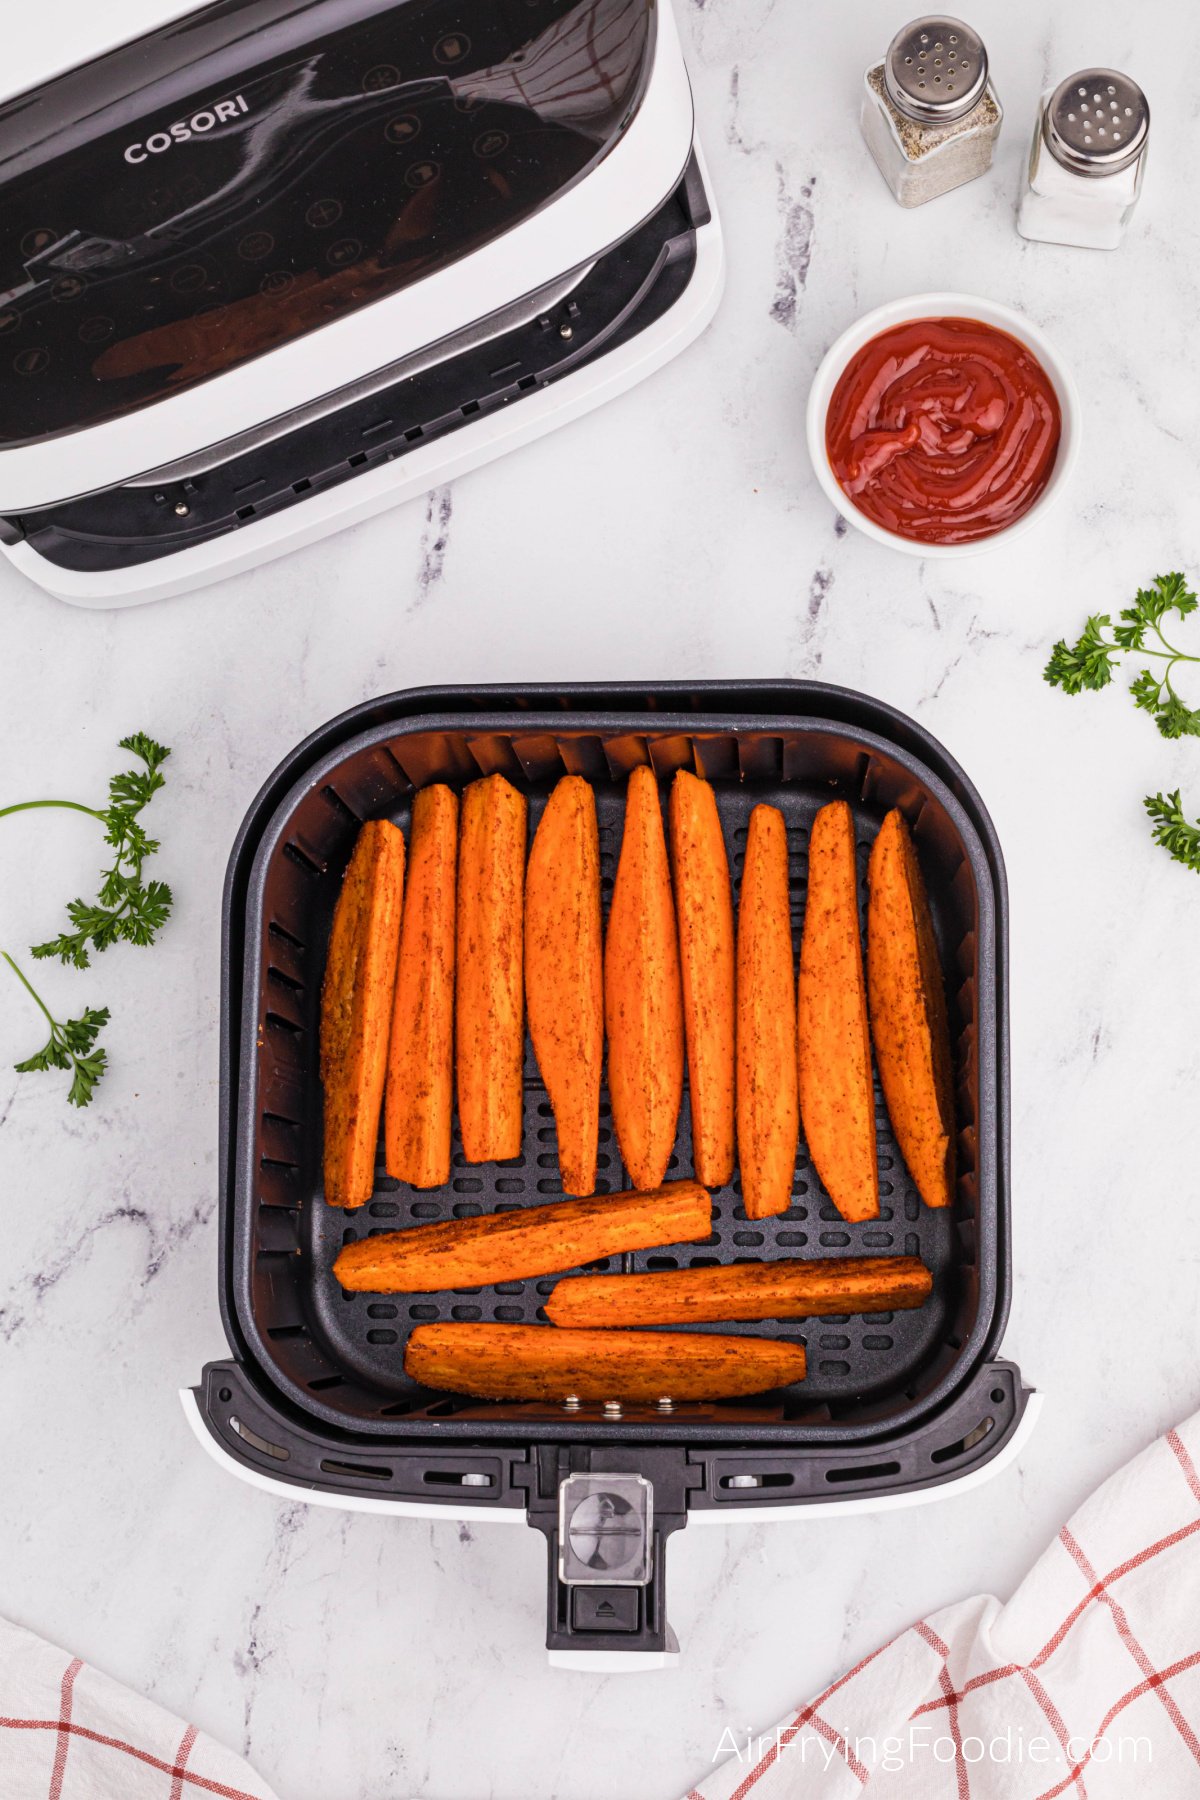 Sweet potato wedges in air fryer basket ready to cook.